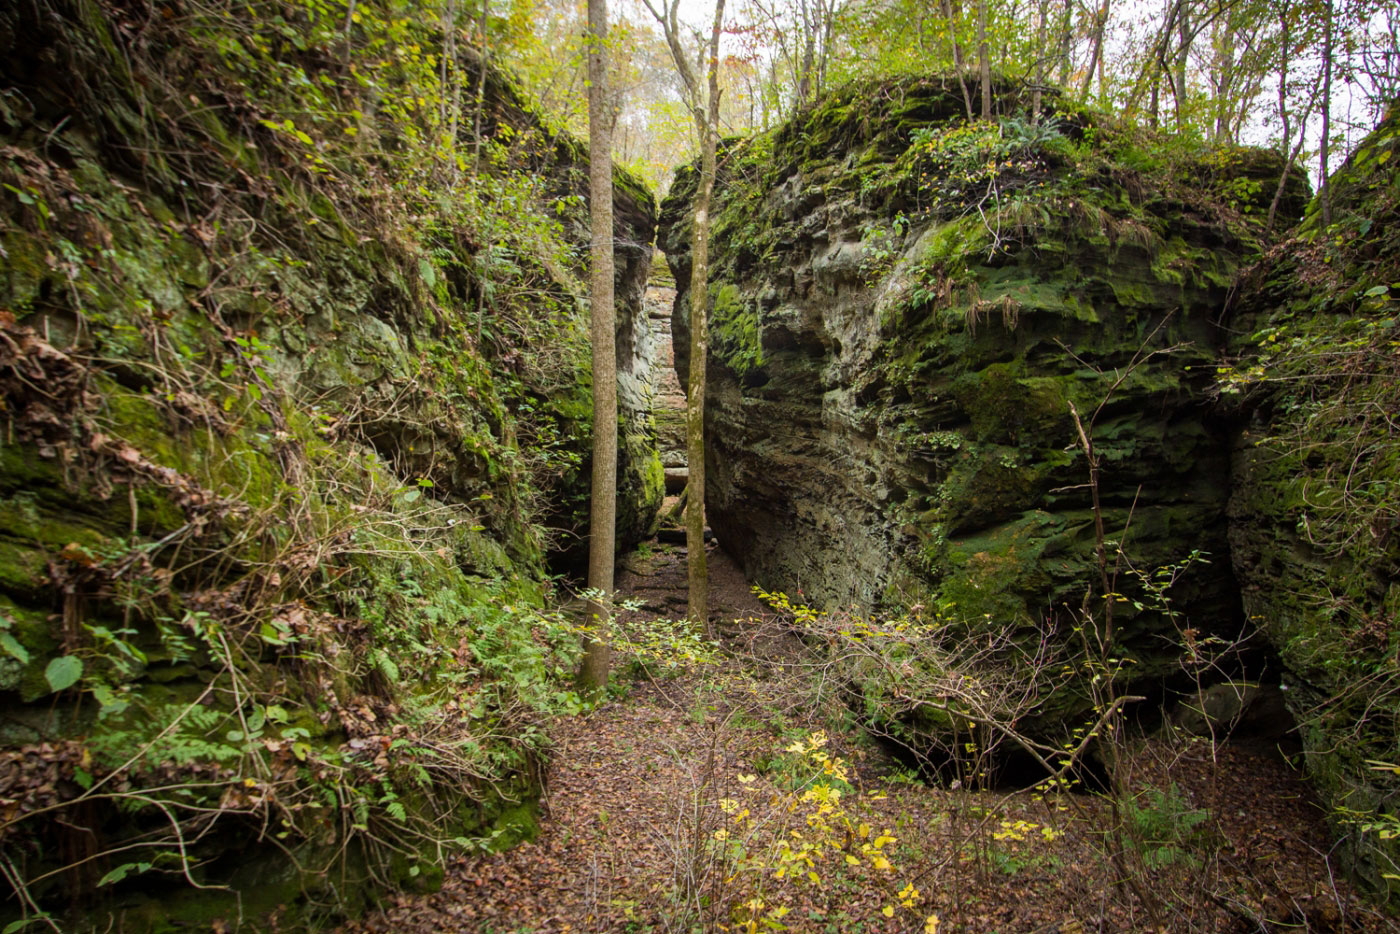 Hike Panther Den Loop in Shawnee National Forest, Illinois - Stav is Lost